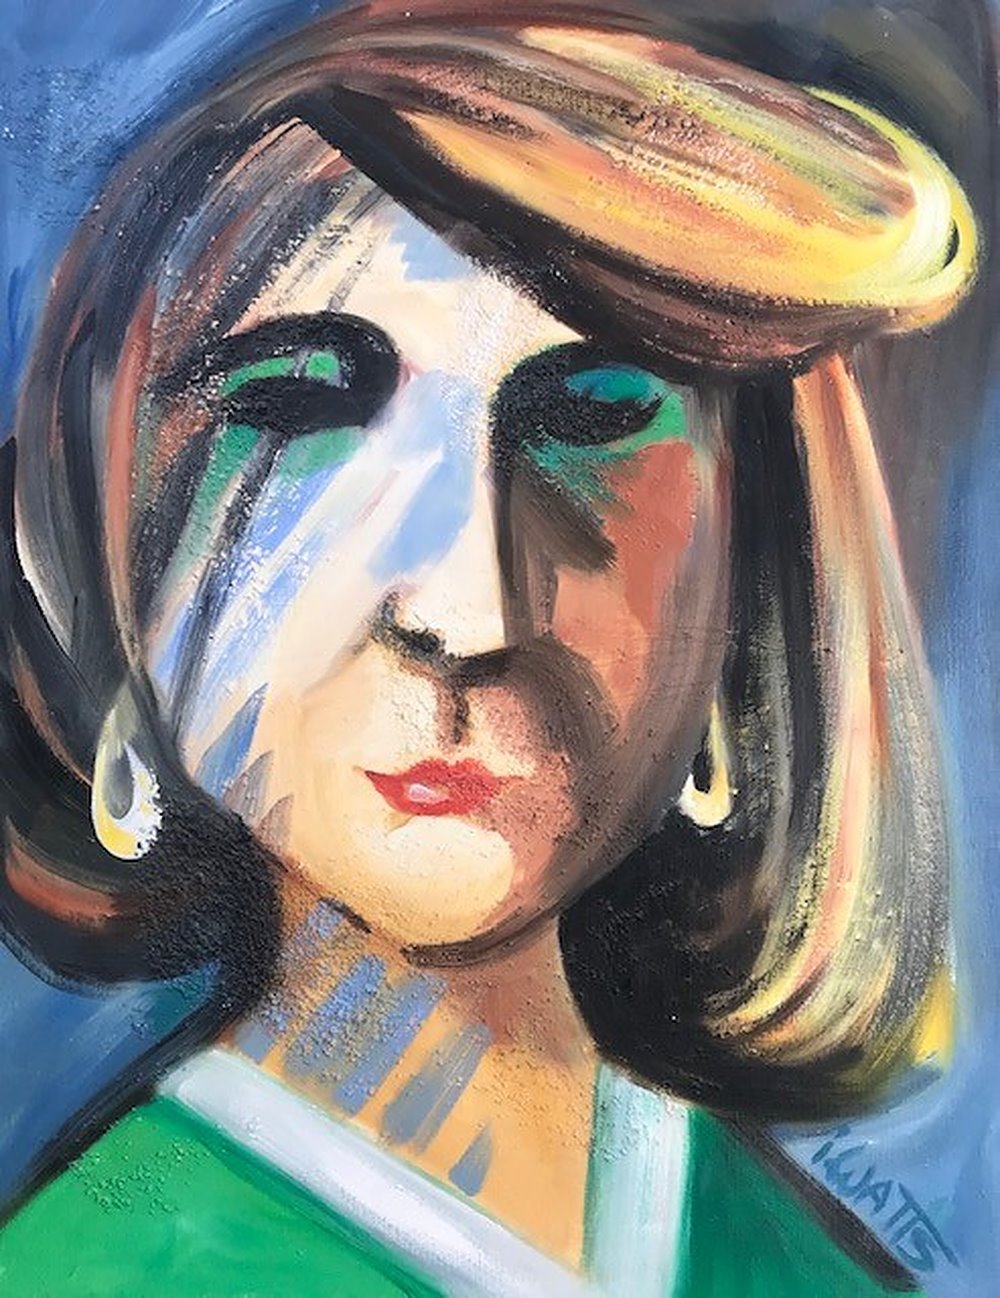 Girl In The Green Dress by Irene Watts | ArtworkNetwork.com